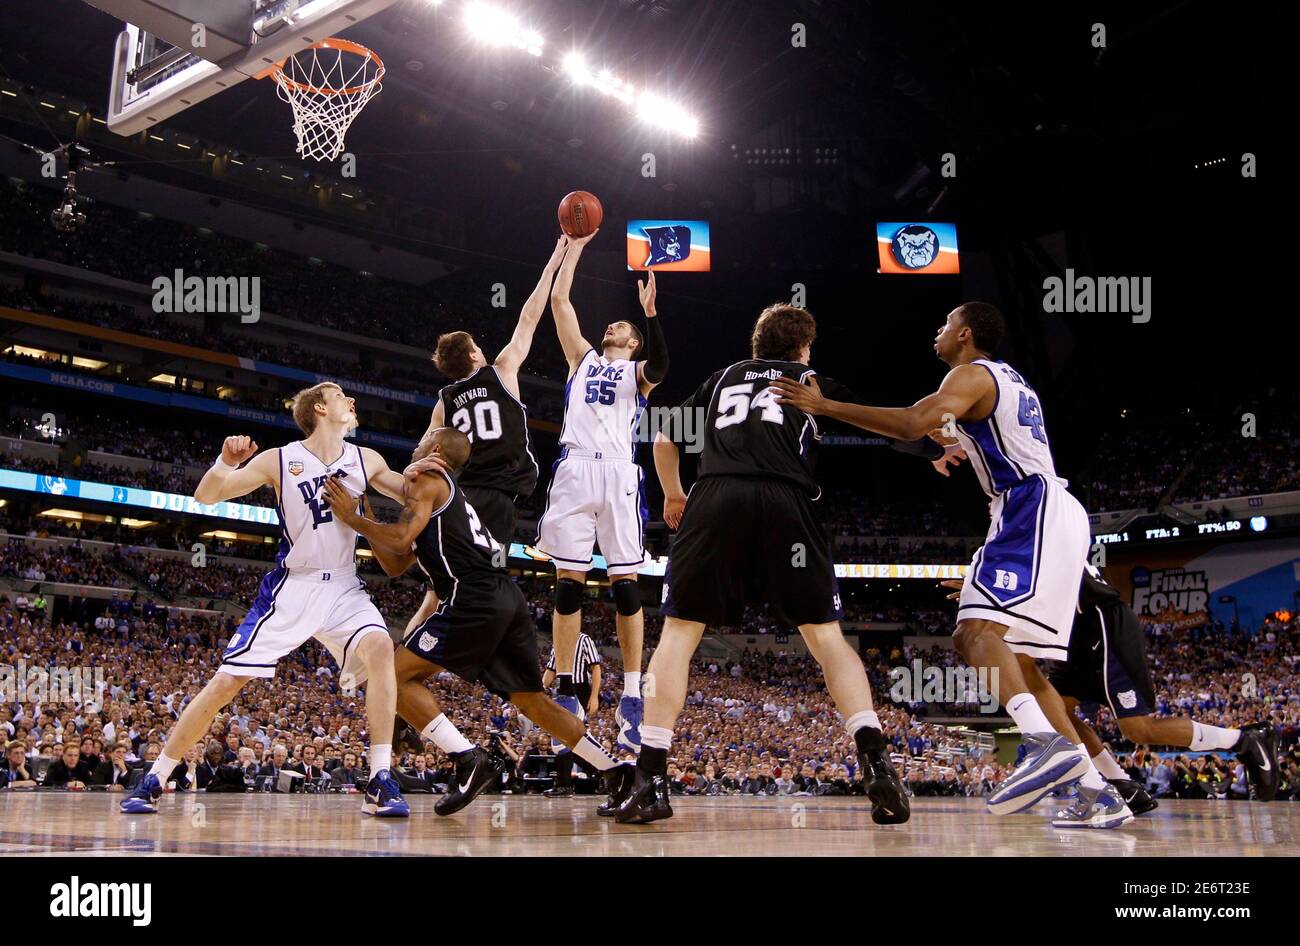 Duke's Brian Zoubek (55) shoots on Butler's Gordon Hayward (20) during their NCAA National Championship college basketball game in Indianapolis, Indiana, April 5, 2010.     REUTERS/Jeff Haynes (UNITED STATES - Tags: SPORT BASKETBALL) Stock Photo